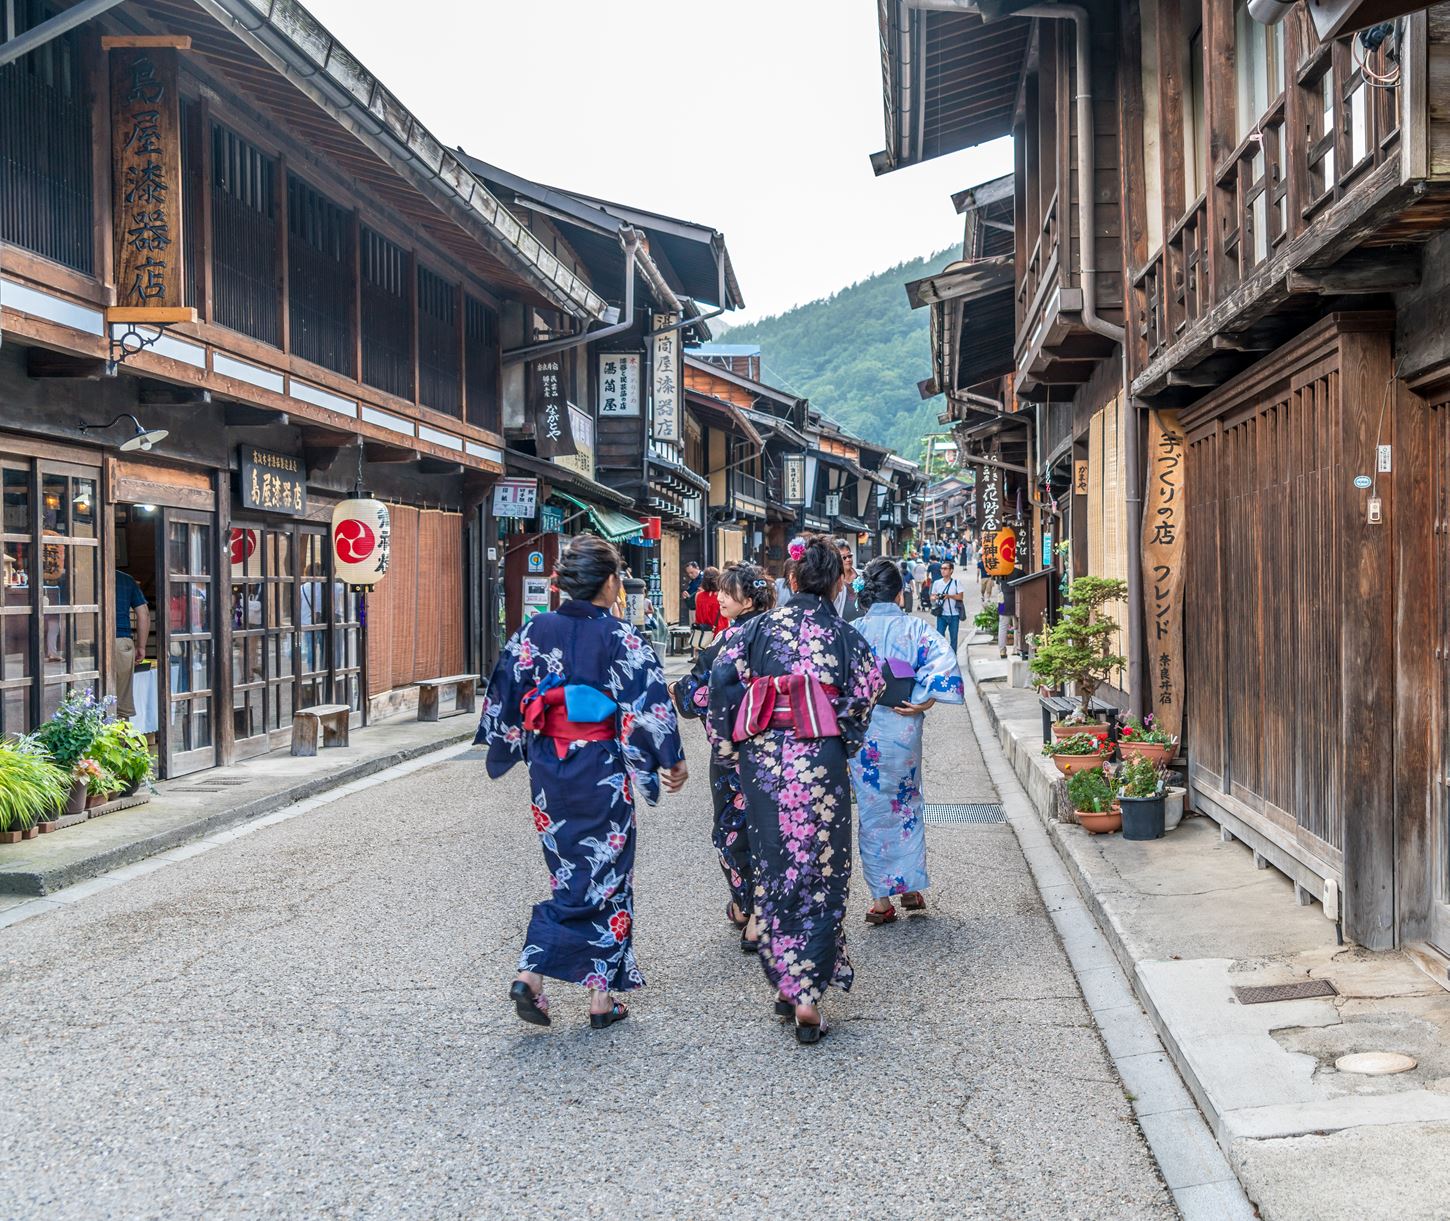 Sightseeing scenery that simply shows the weather in Nagano in August6